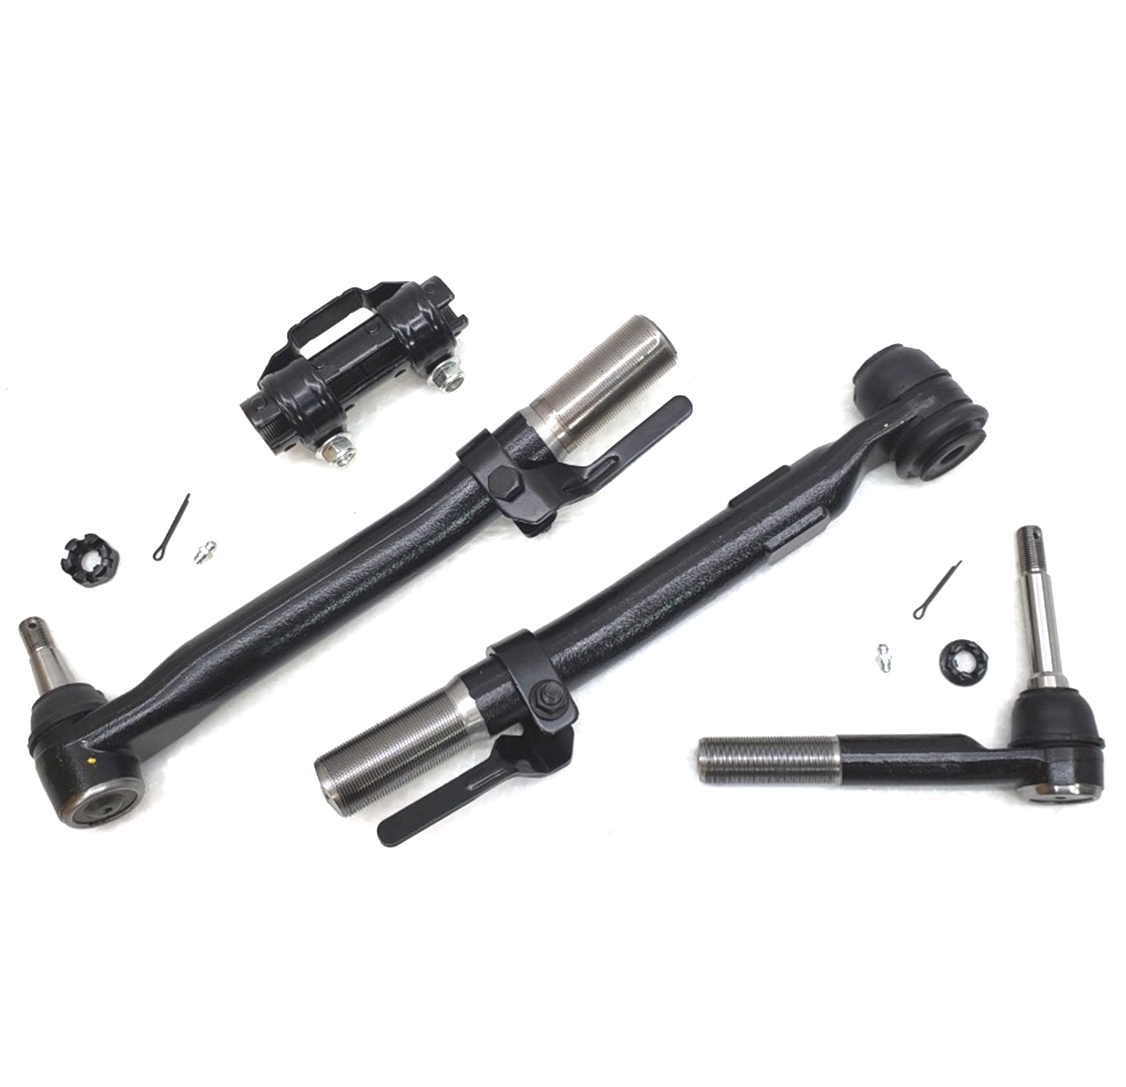 Lifetime Auto Parts Tie Rod Steering Kit for 2017-2019 Ford F250 & F350 Super Duty 4x4 Wide Frame